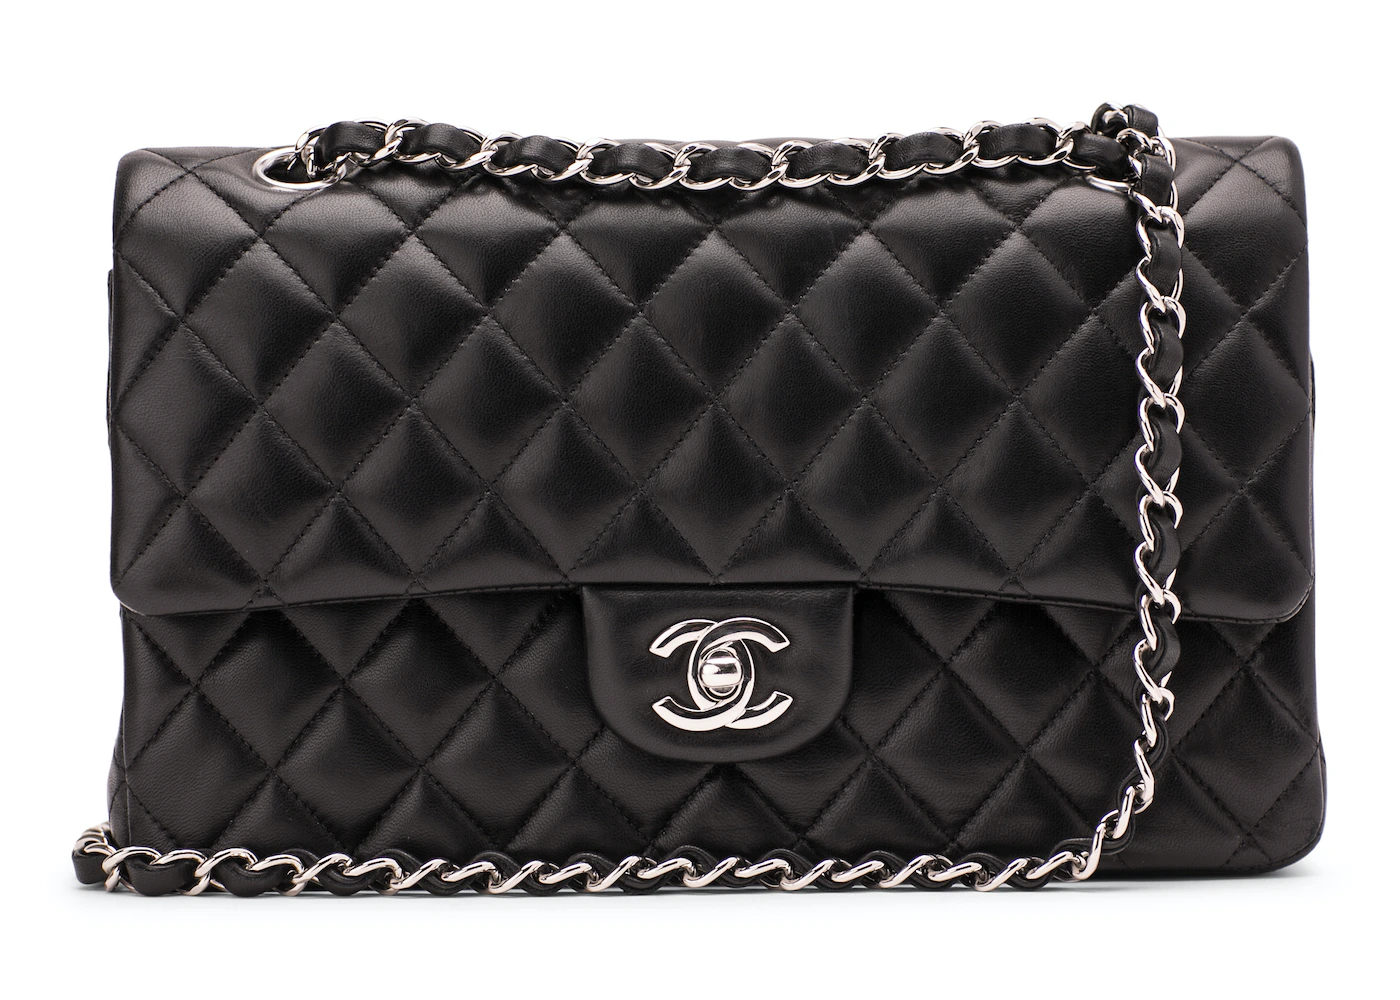 chanel classic flap bag with silver hardware